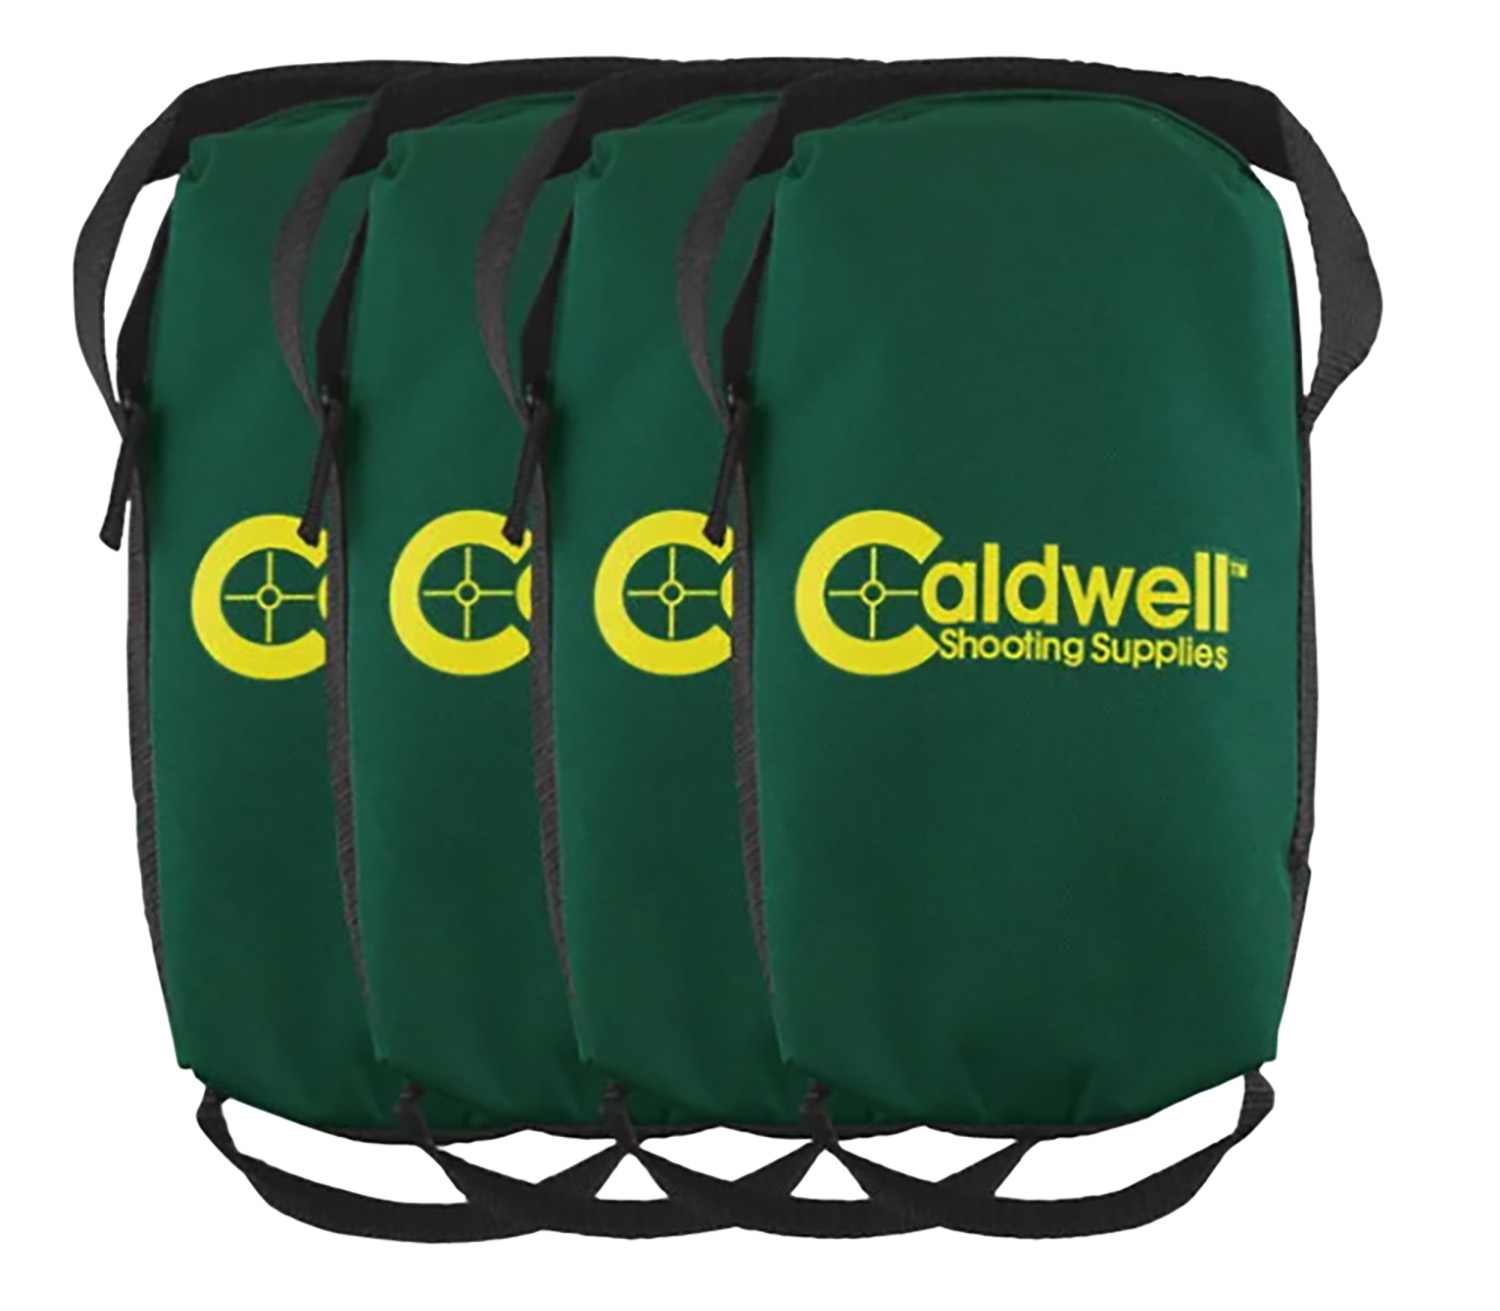 Caldwell 533117 Lead Sled Weighted Bag with Dark Green Finish, Unfilled Style, weighs 7-25 lbs & 5.50